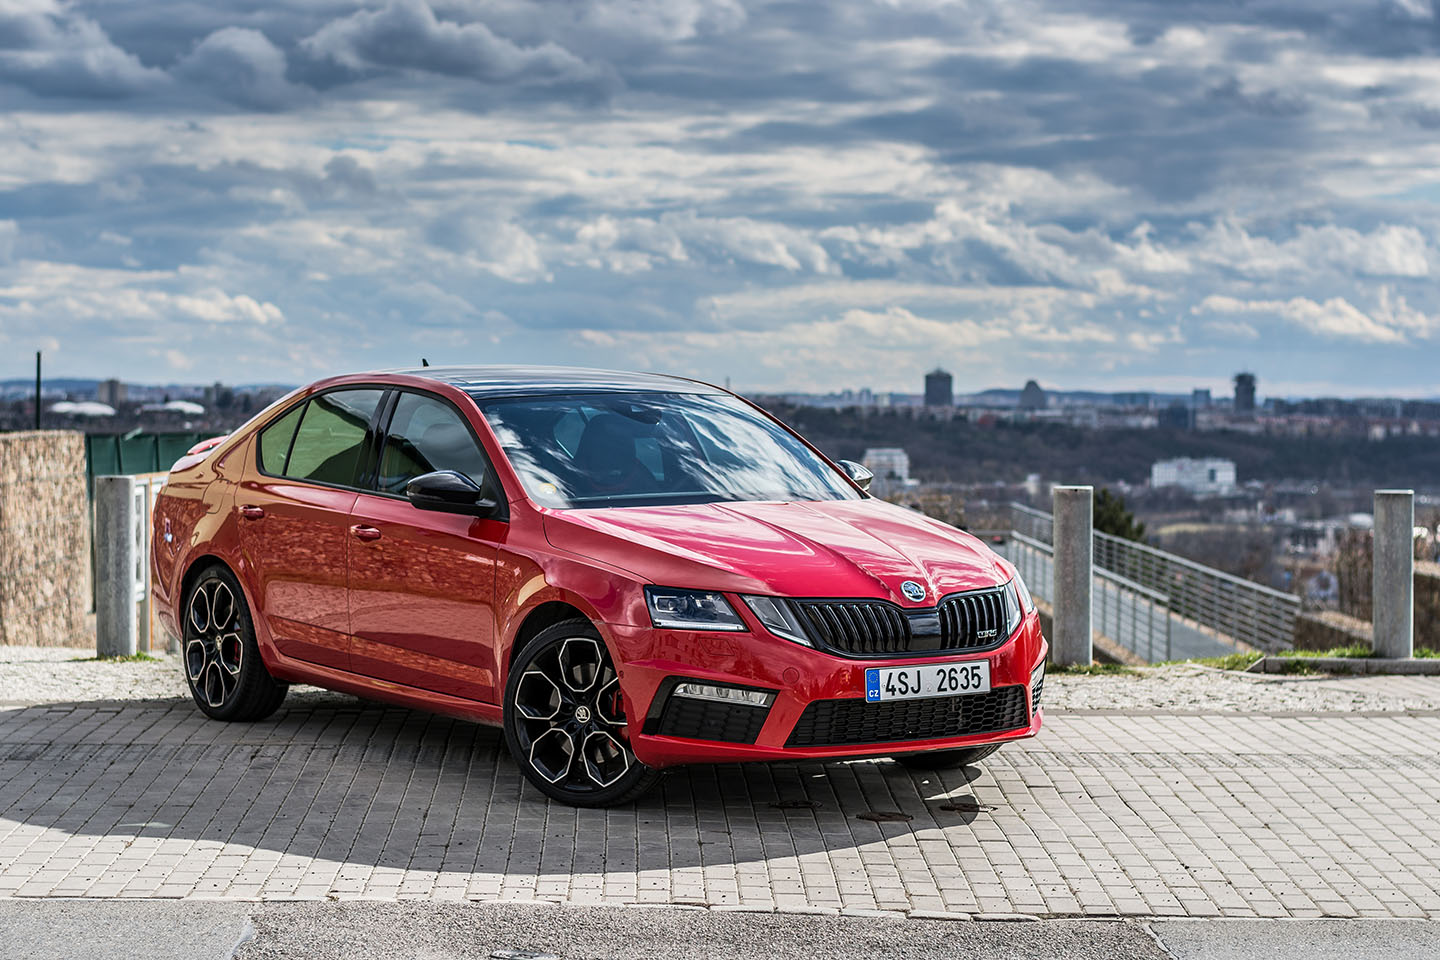 New Skoda Octavia RS 245, model year 2018 in Czech with view on Prague